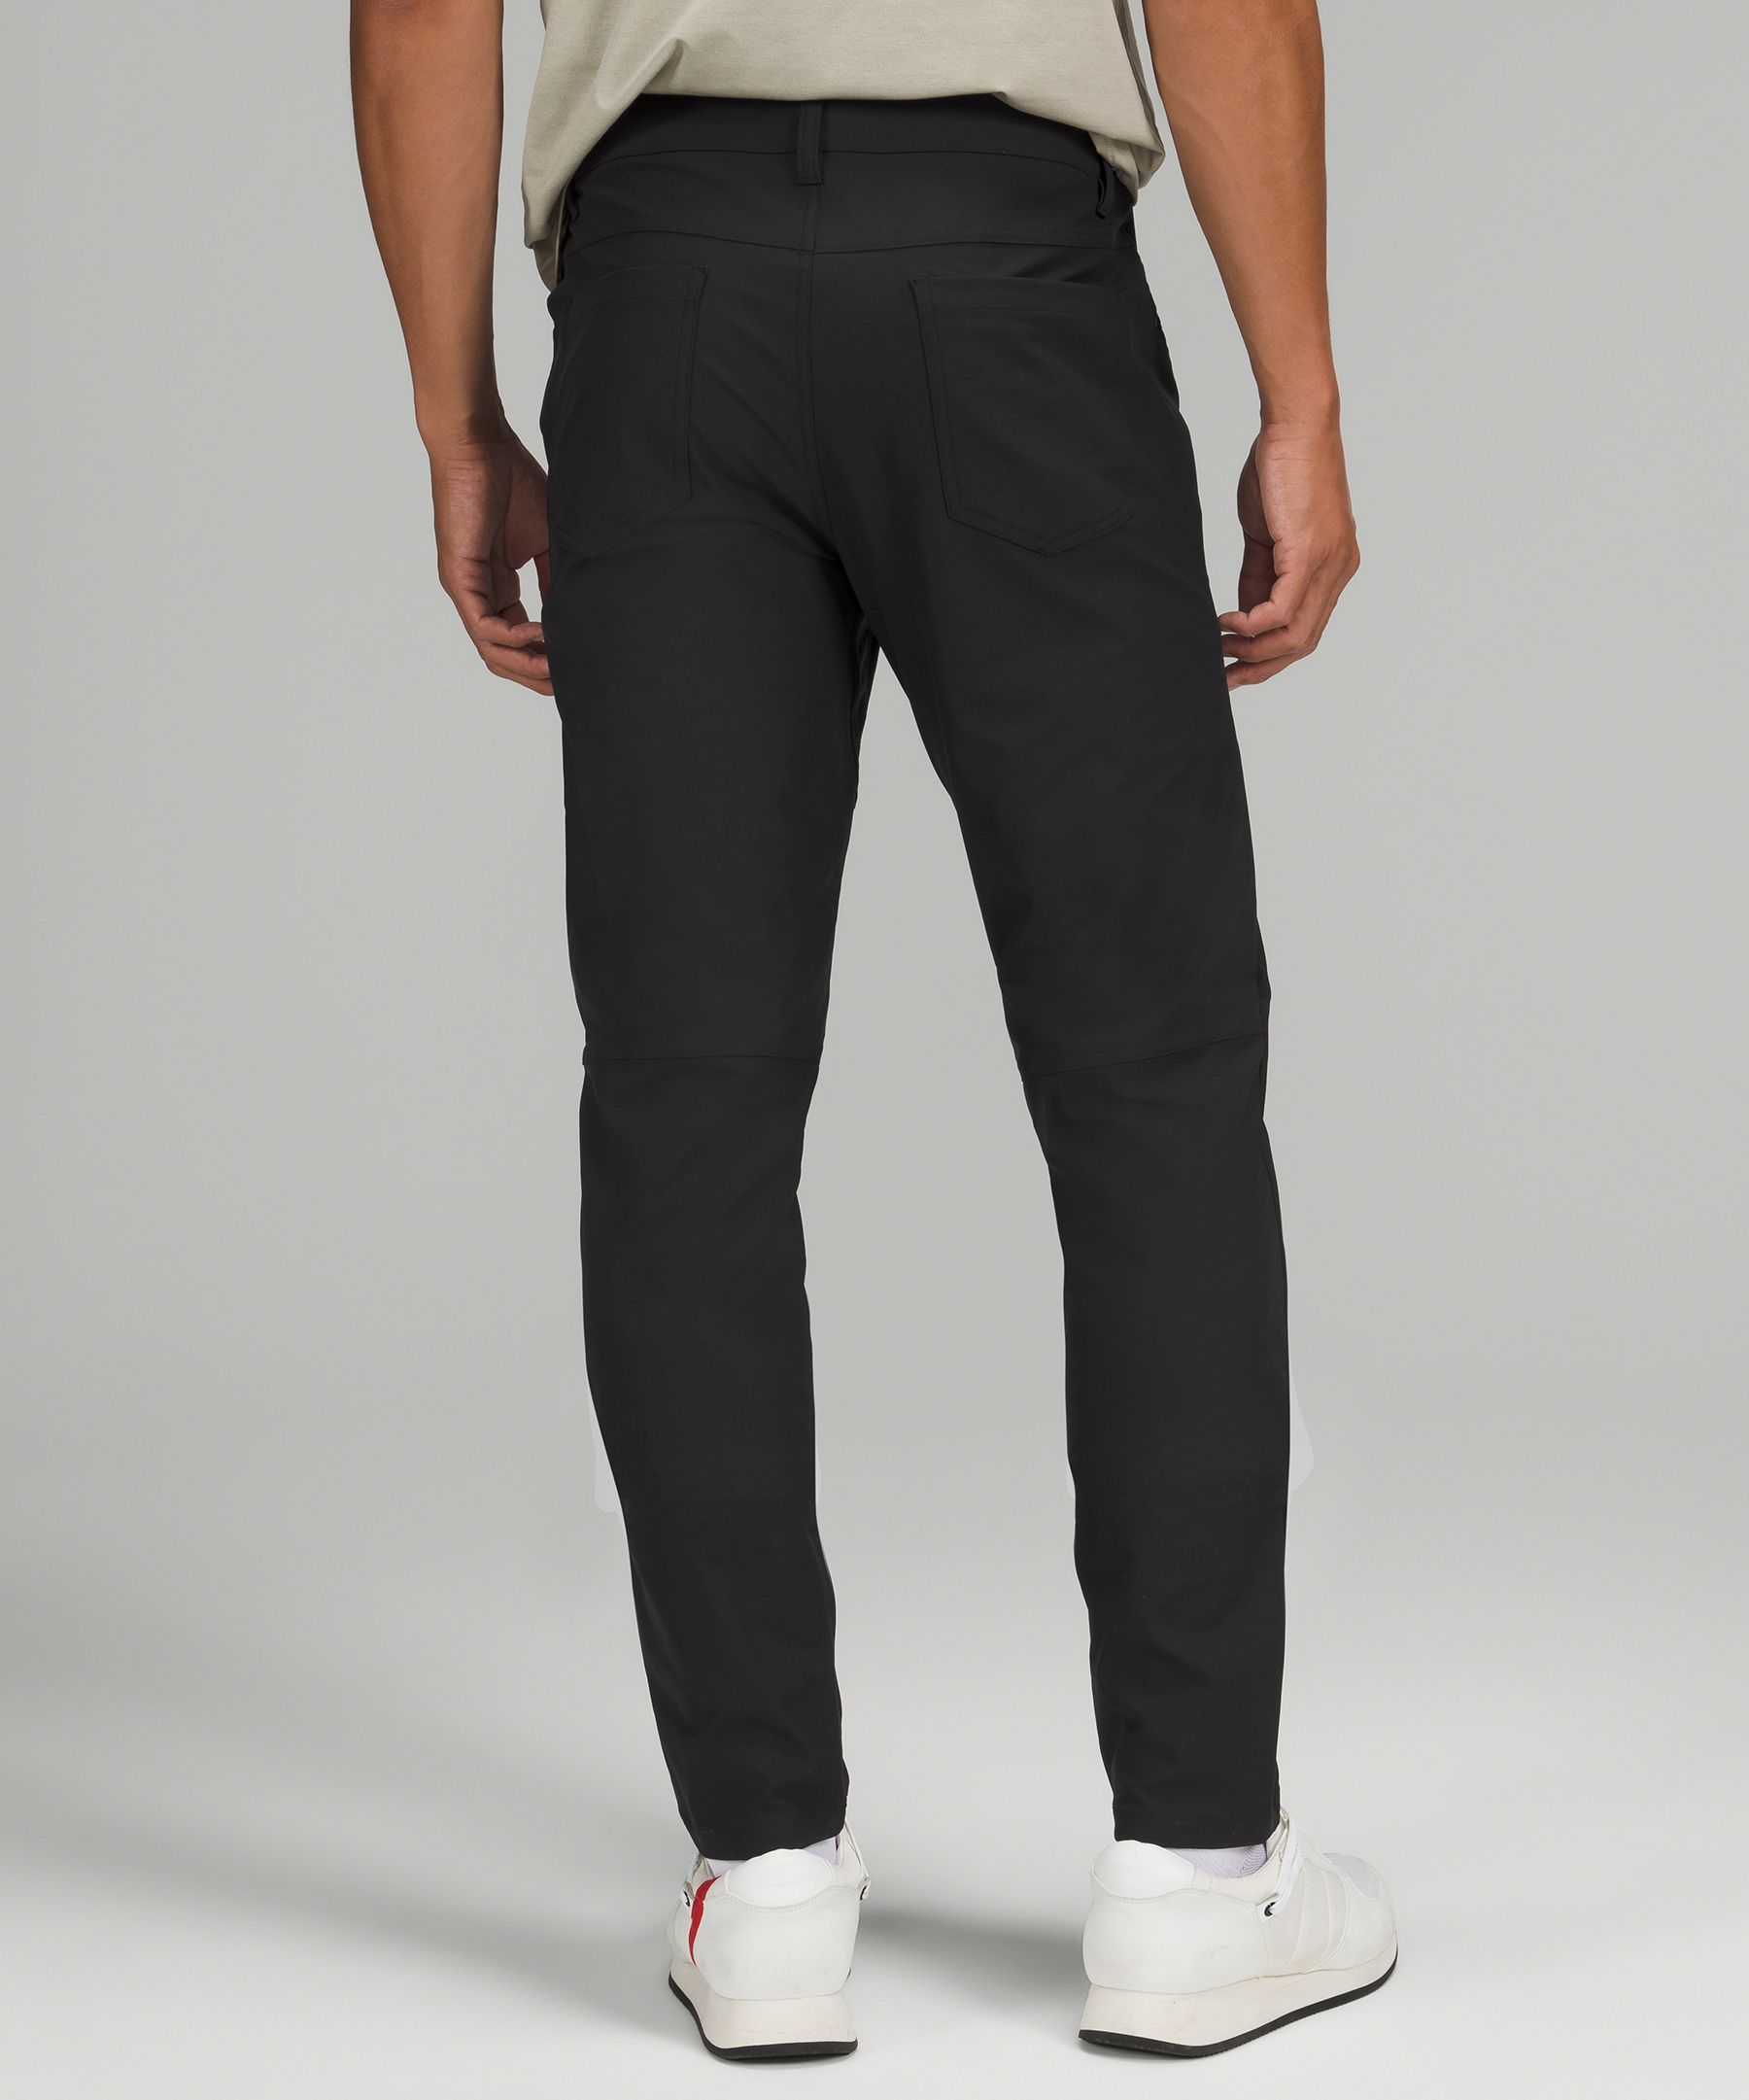 Leather Lululemon Leggings, The Warpstreme fabric provides these pants with  ….